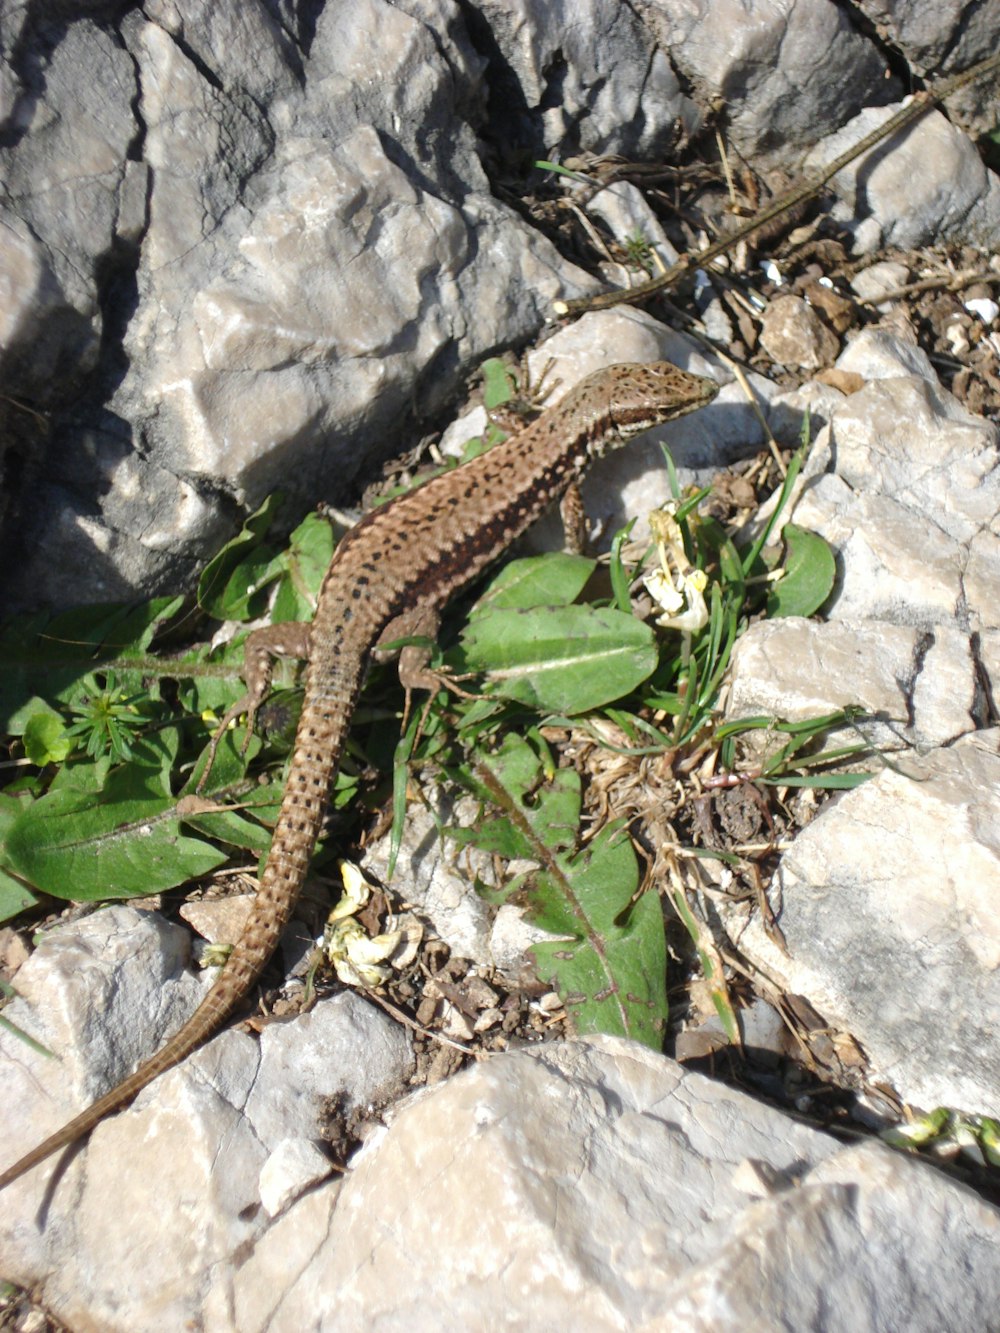 a lizard that is laying on some rocks